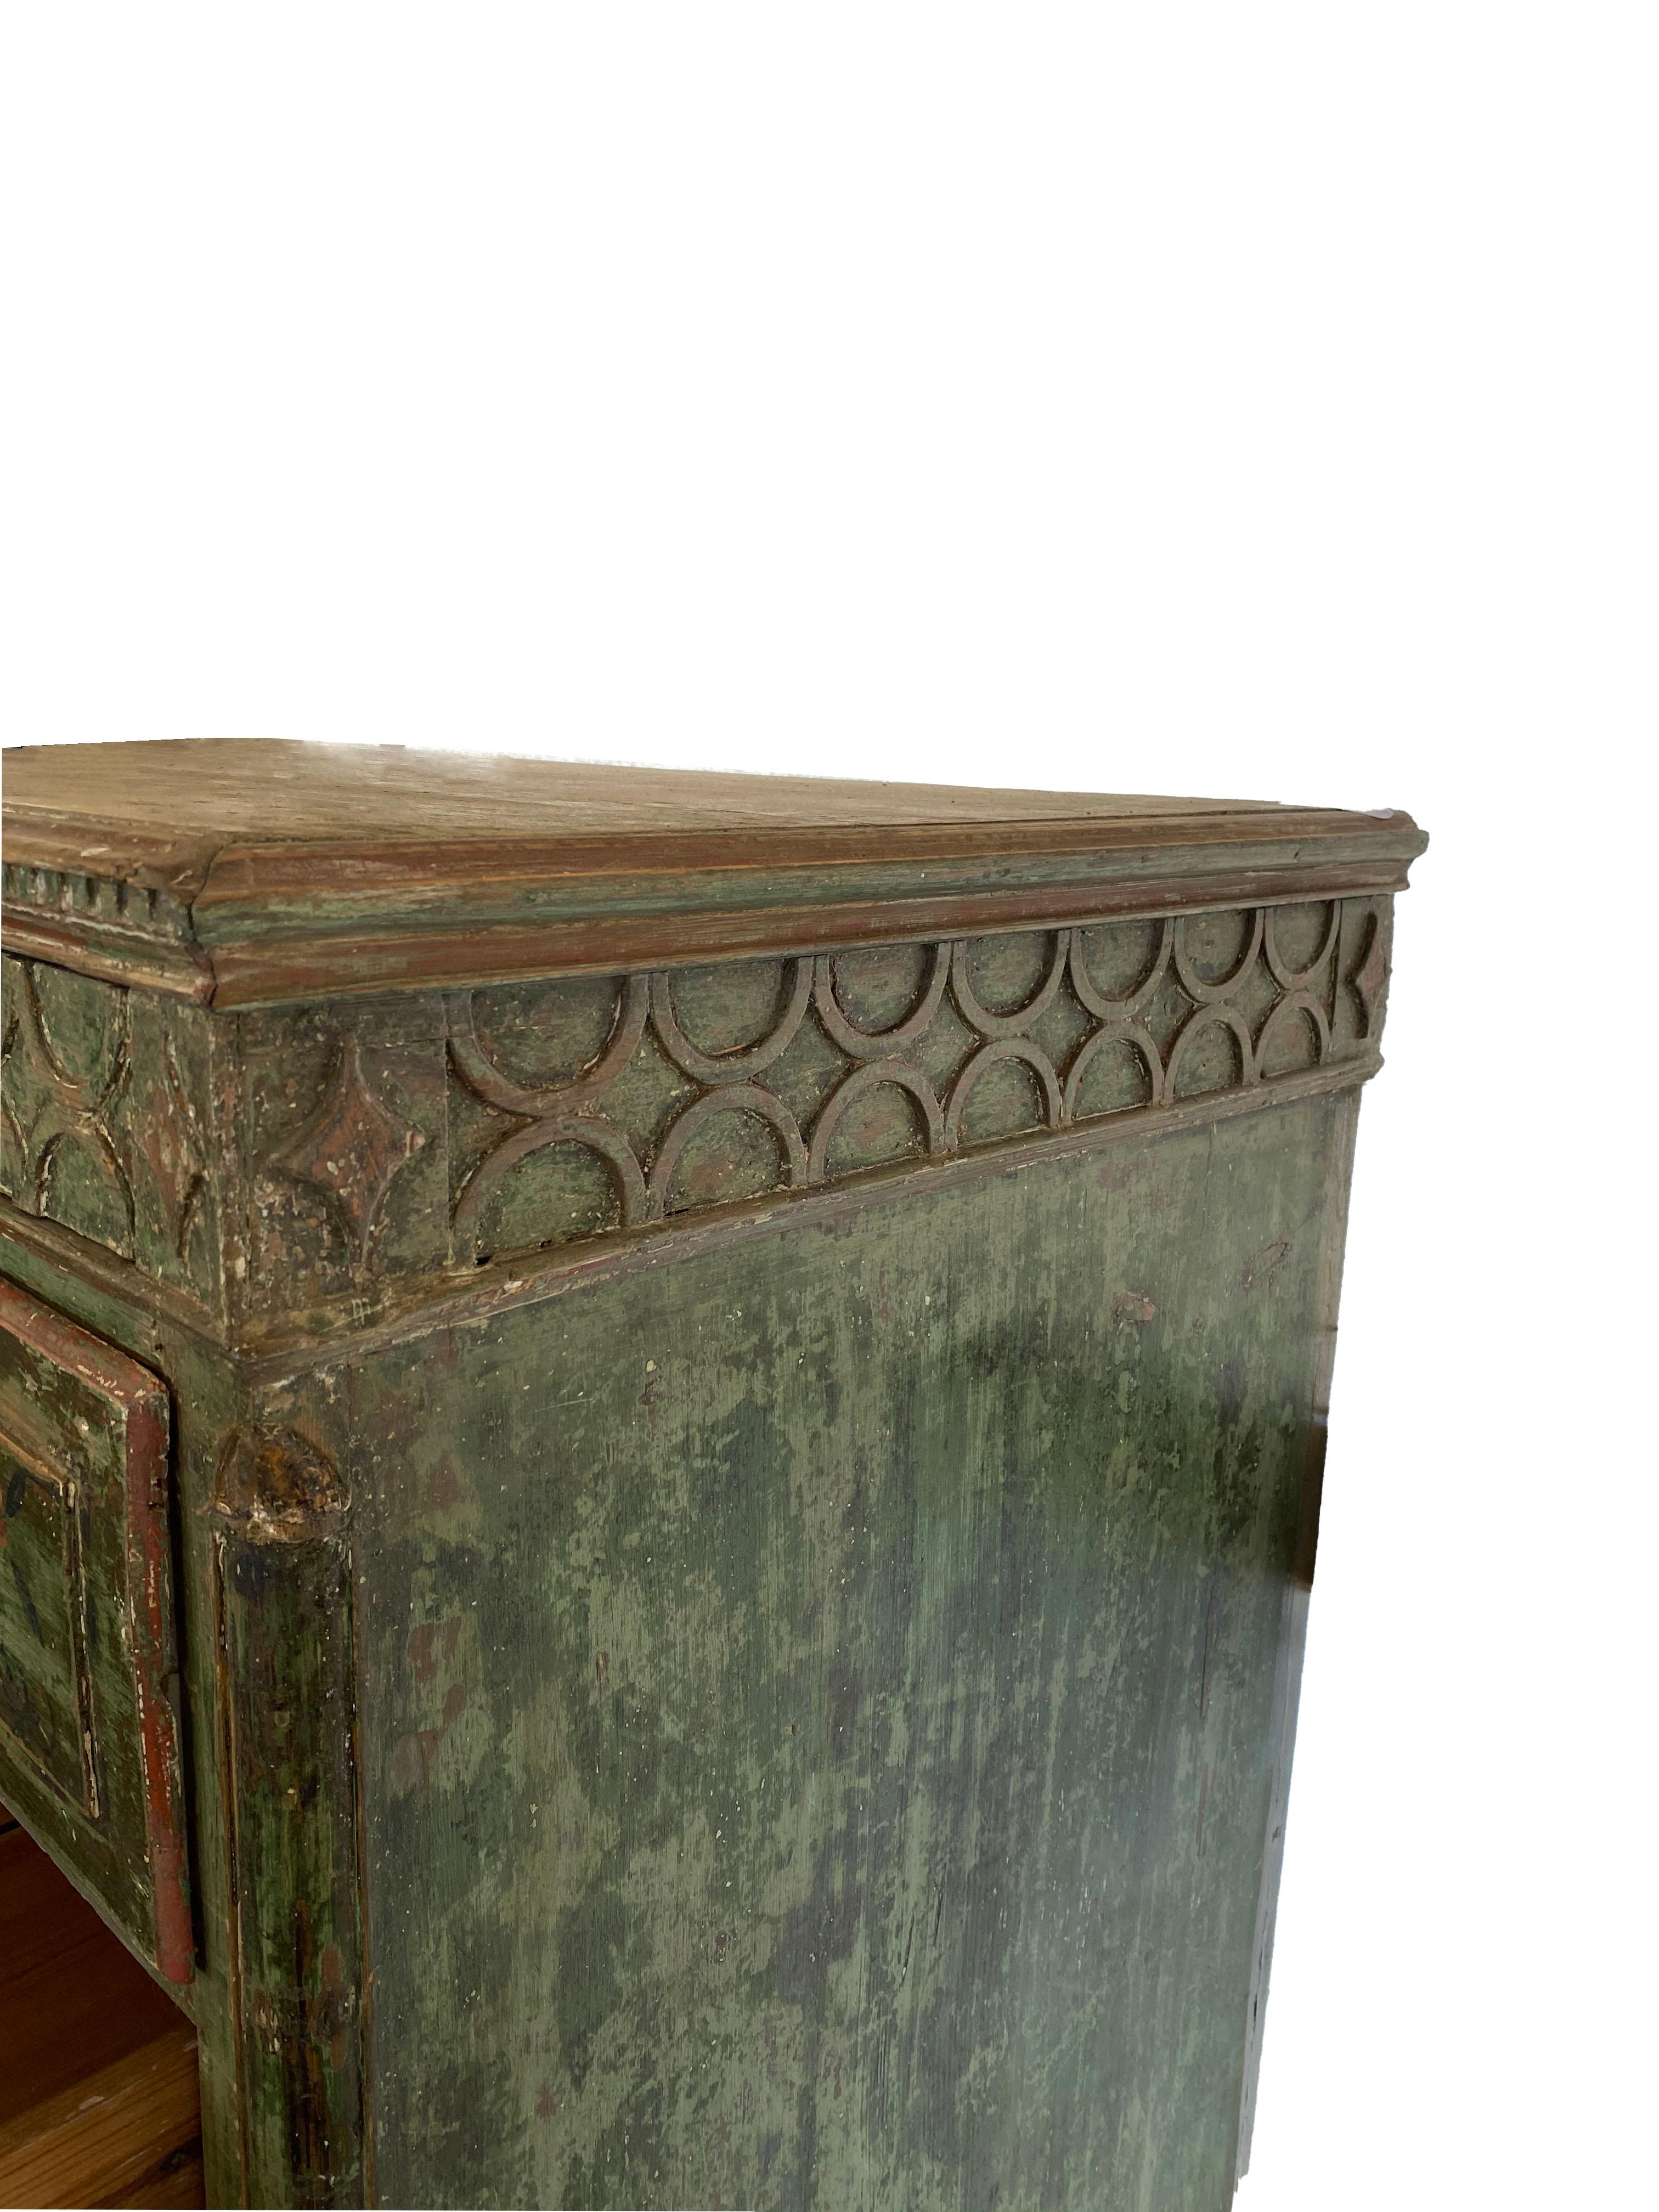 This exquisite Swedish gustavian period chest of drawers is rare and unusual for its period. Its green color is original and full of patina and layered depth. Each drawer has its own key for opening. A dental detail runs just above the top small